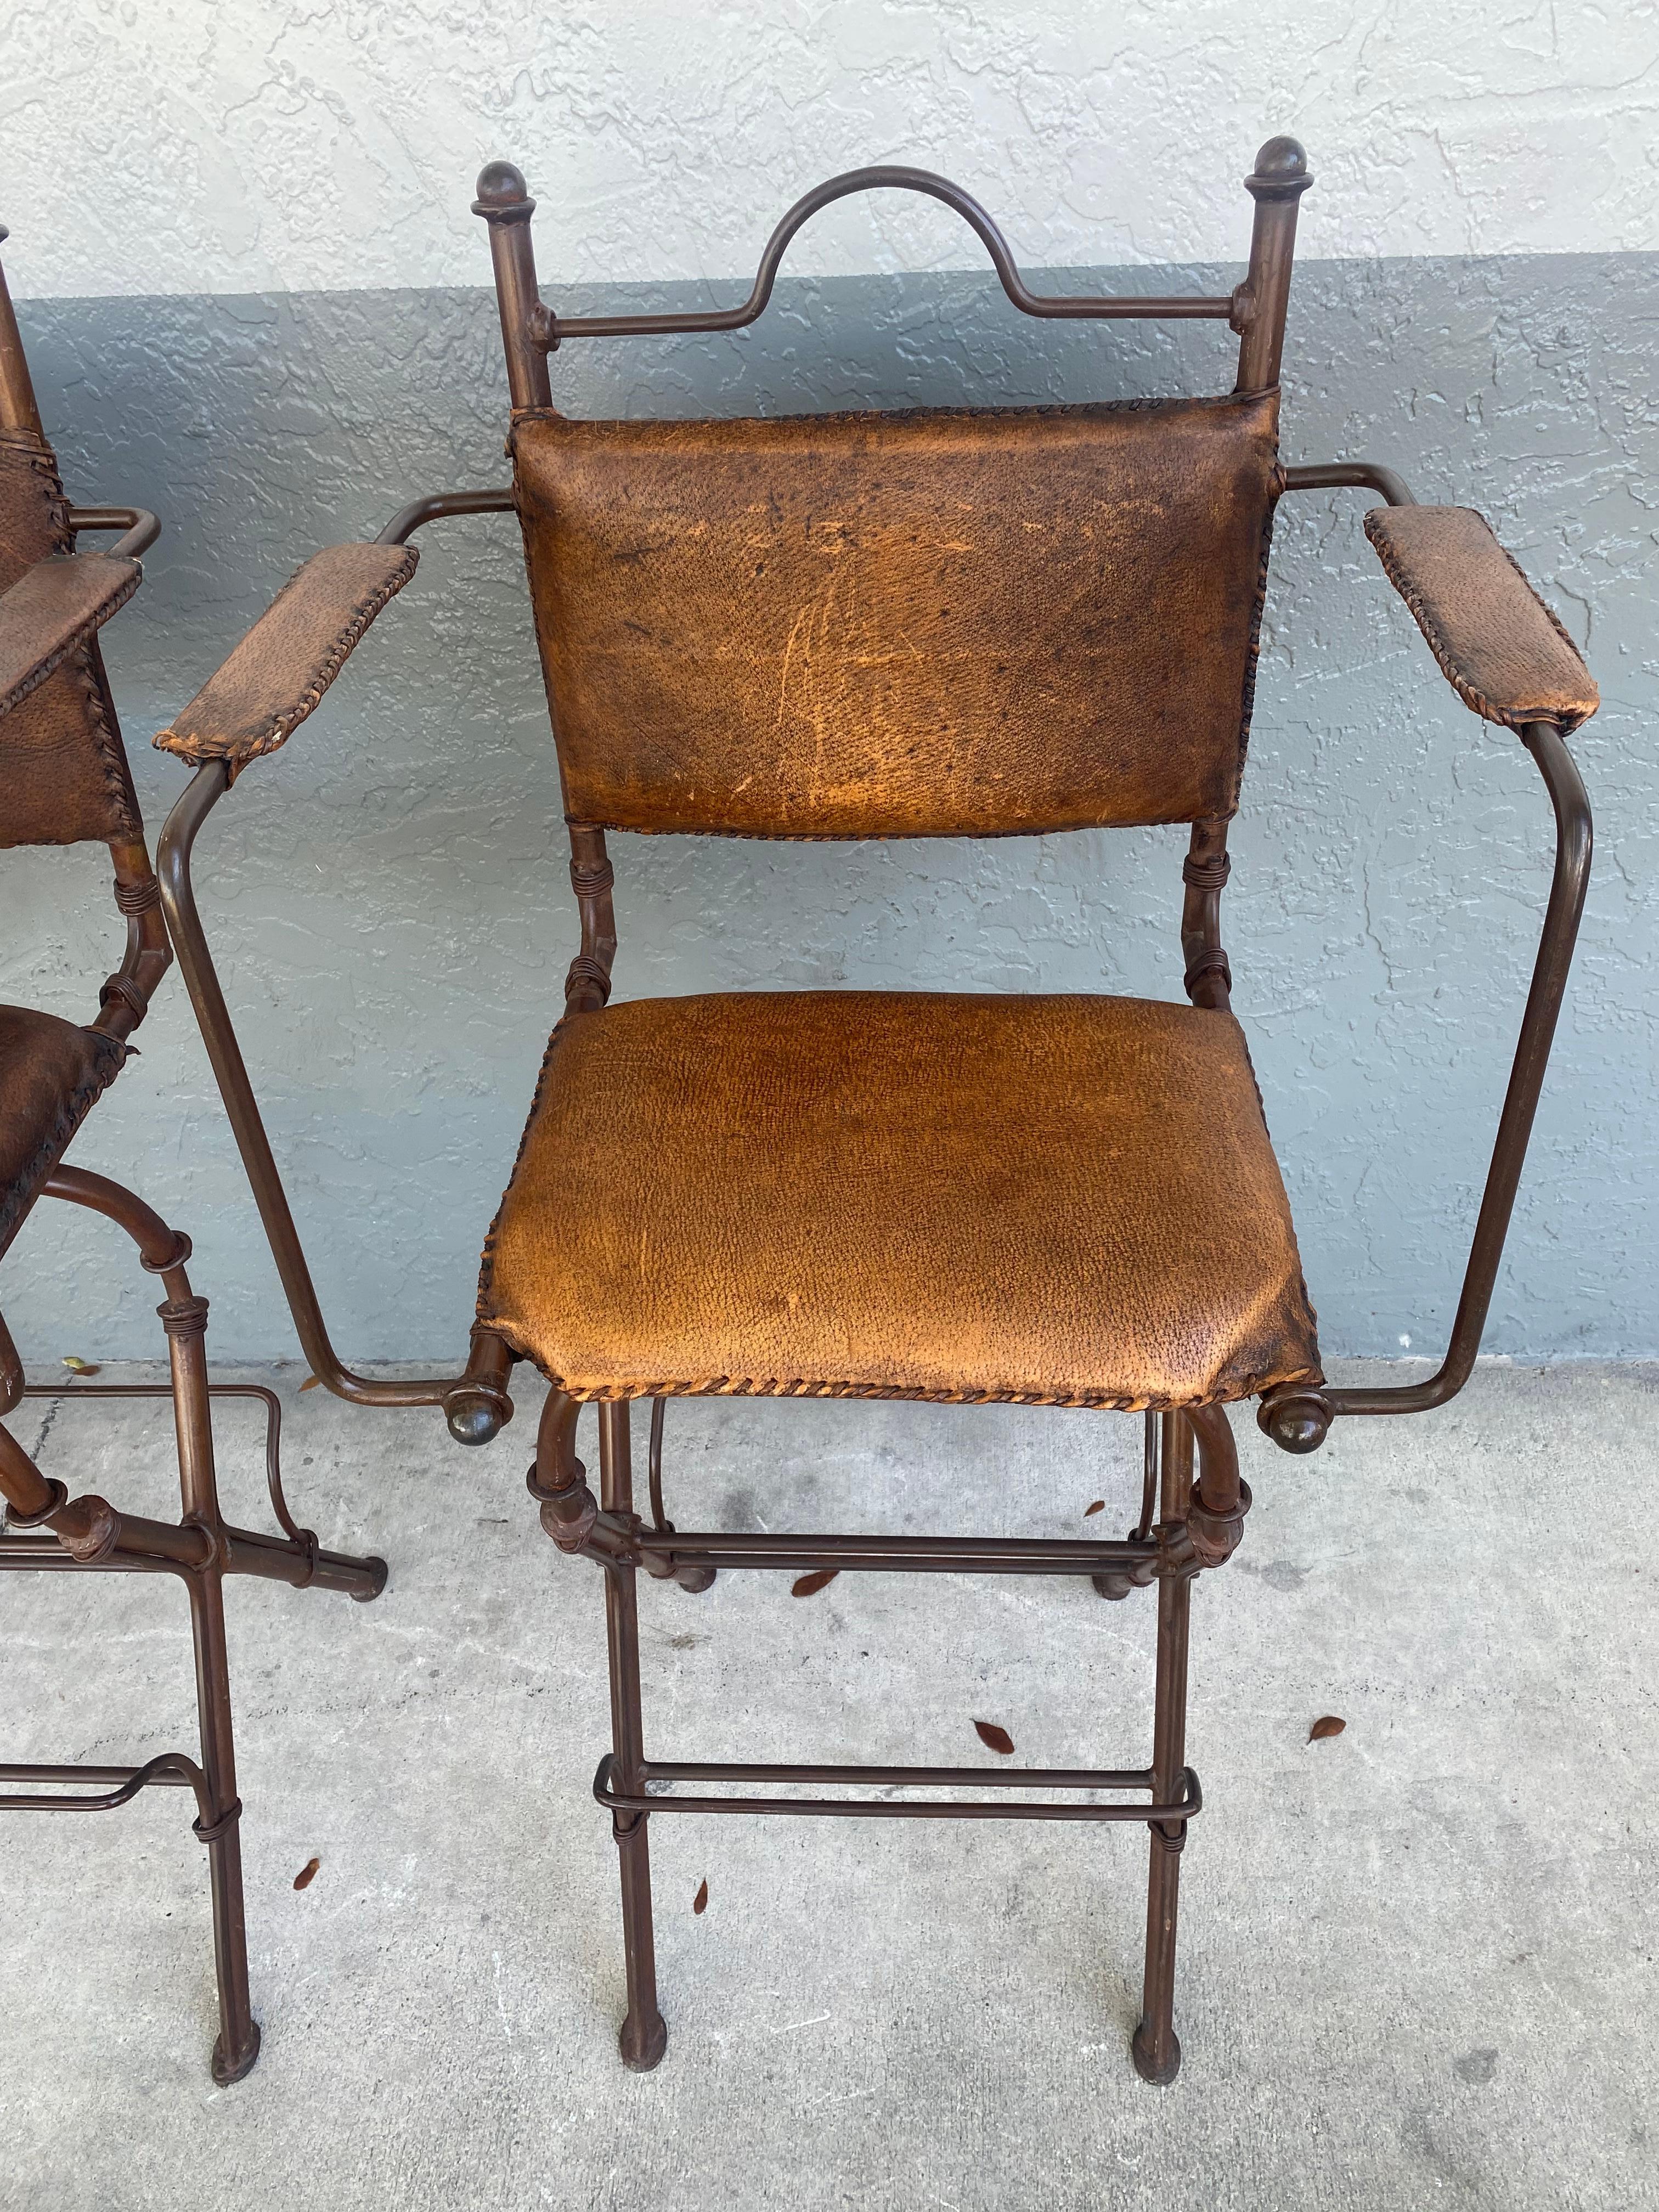 1940s Rustic Industrial Iron and Buffalo Leather Swivel Stools, Set of 4 For Sale 7